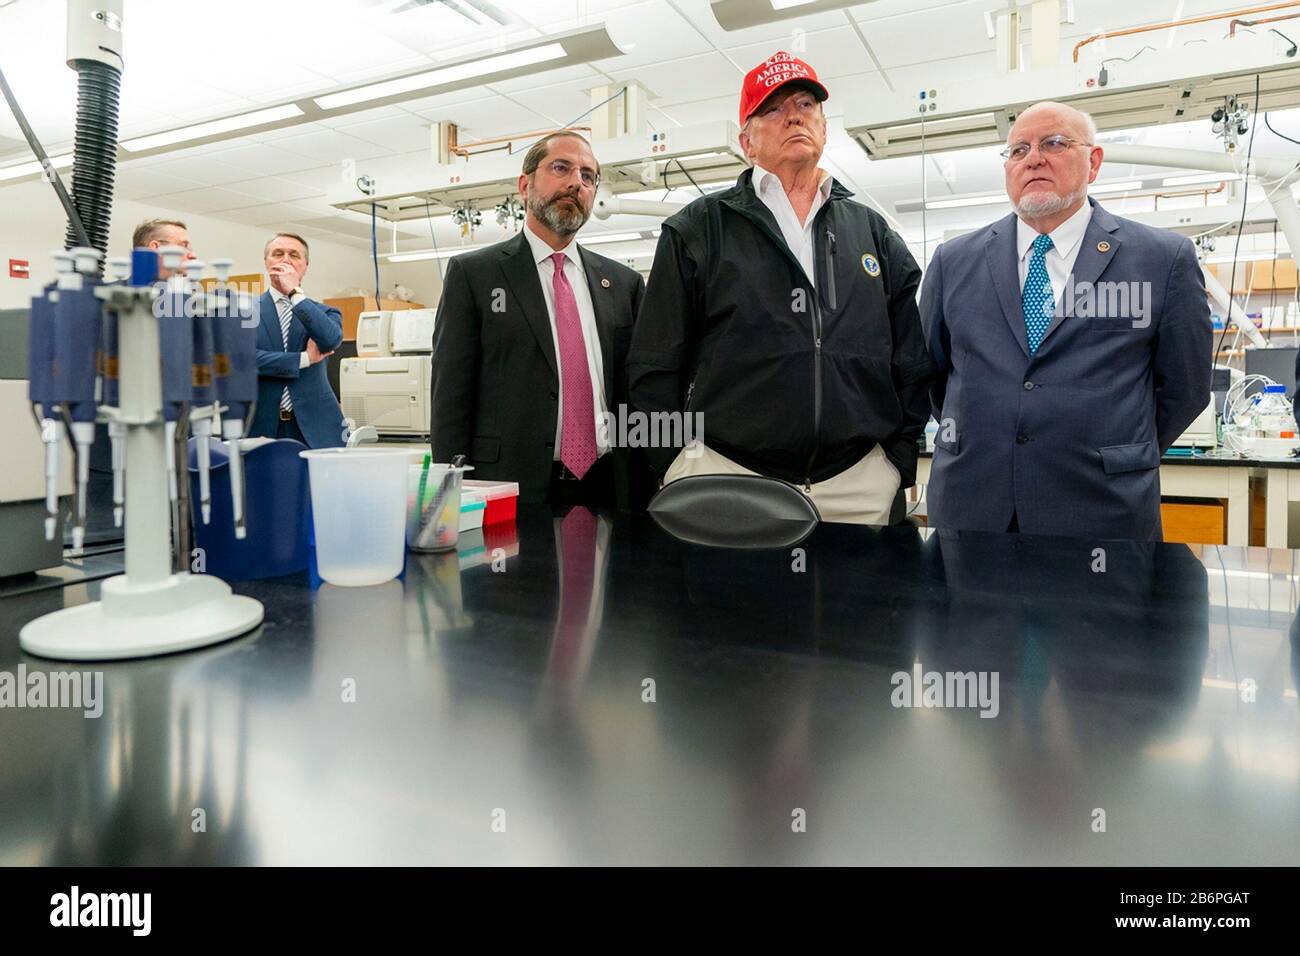 U.S President Donald Trump joined by the Secretary of Health and Human Services Alex Azar, left, Director of Centers for Disease Control and Prevention Dr. Robert Redfield, right, speaks with reporters during a visit to the Centers for Disease Control and Prevention March 6, 2020 in Atlanta, Georgia. Stock Photo